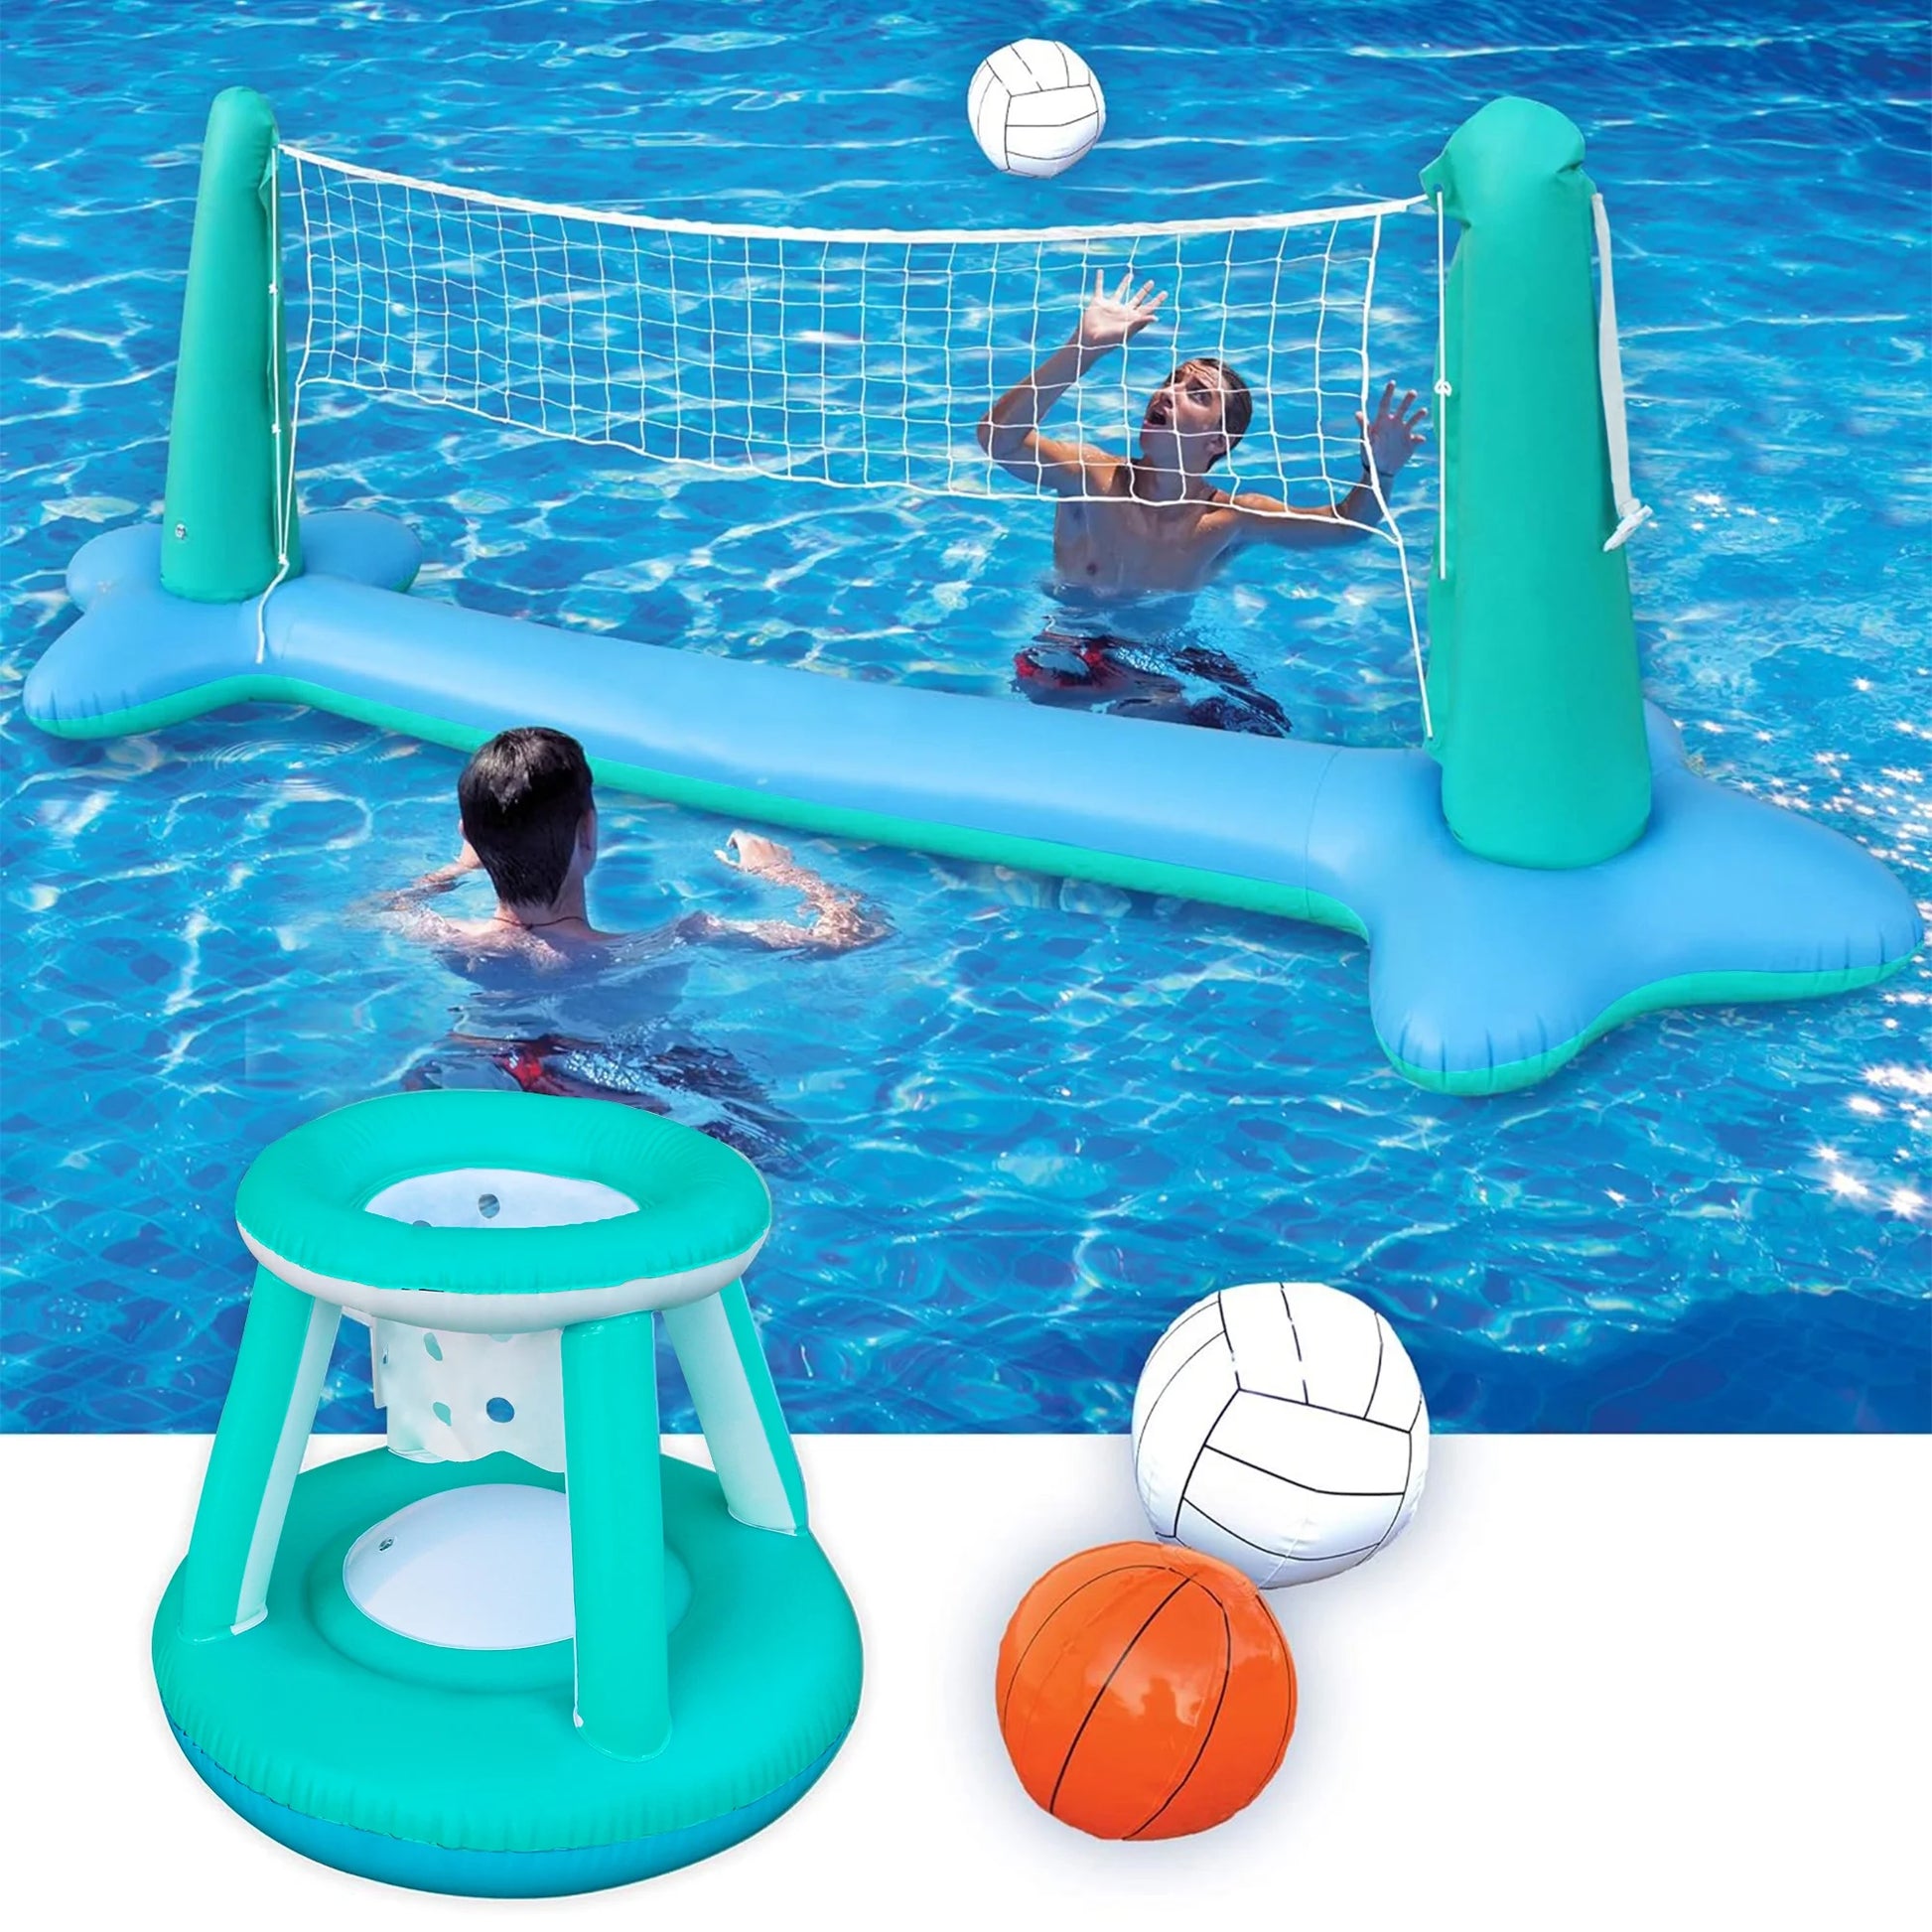 Inflatable Pool Float Game Set with Inflatable Volleyball Net & Basketball Hoops, Summer Pool Game for Kids and Adults - Blue